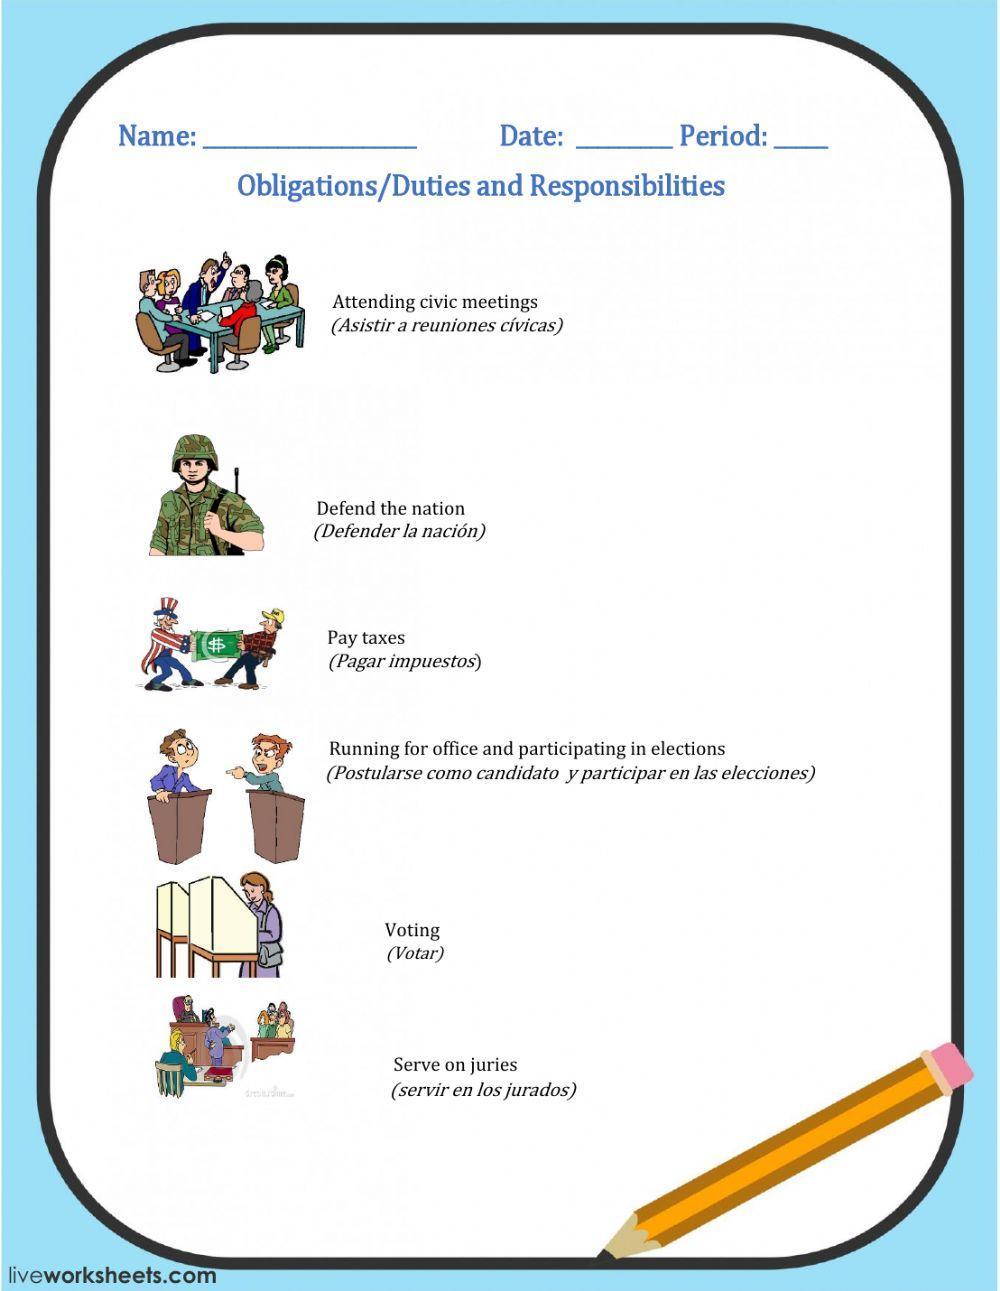 Obligations and Responsibilities-2